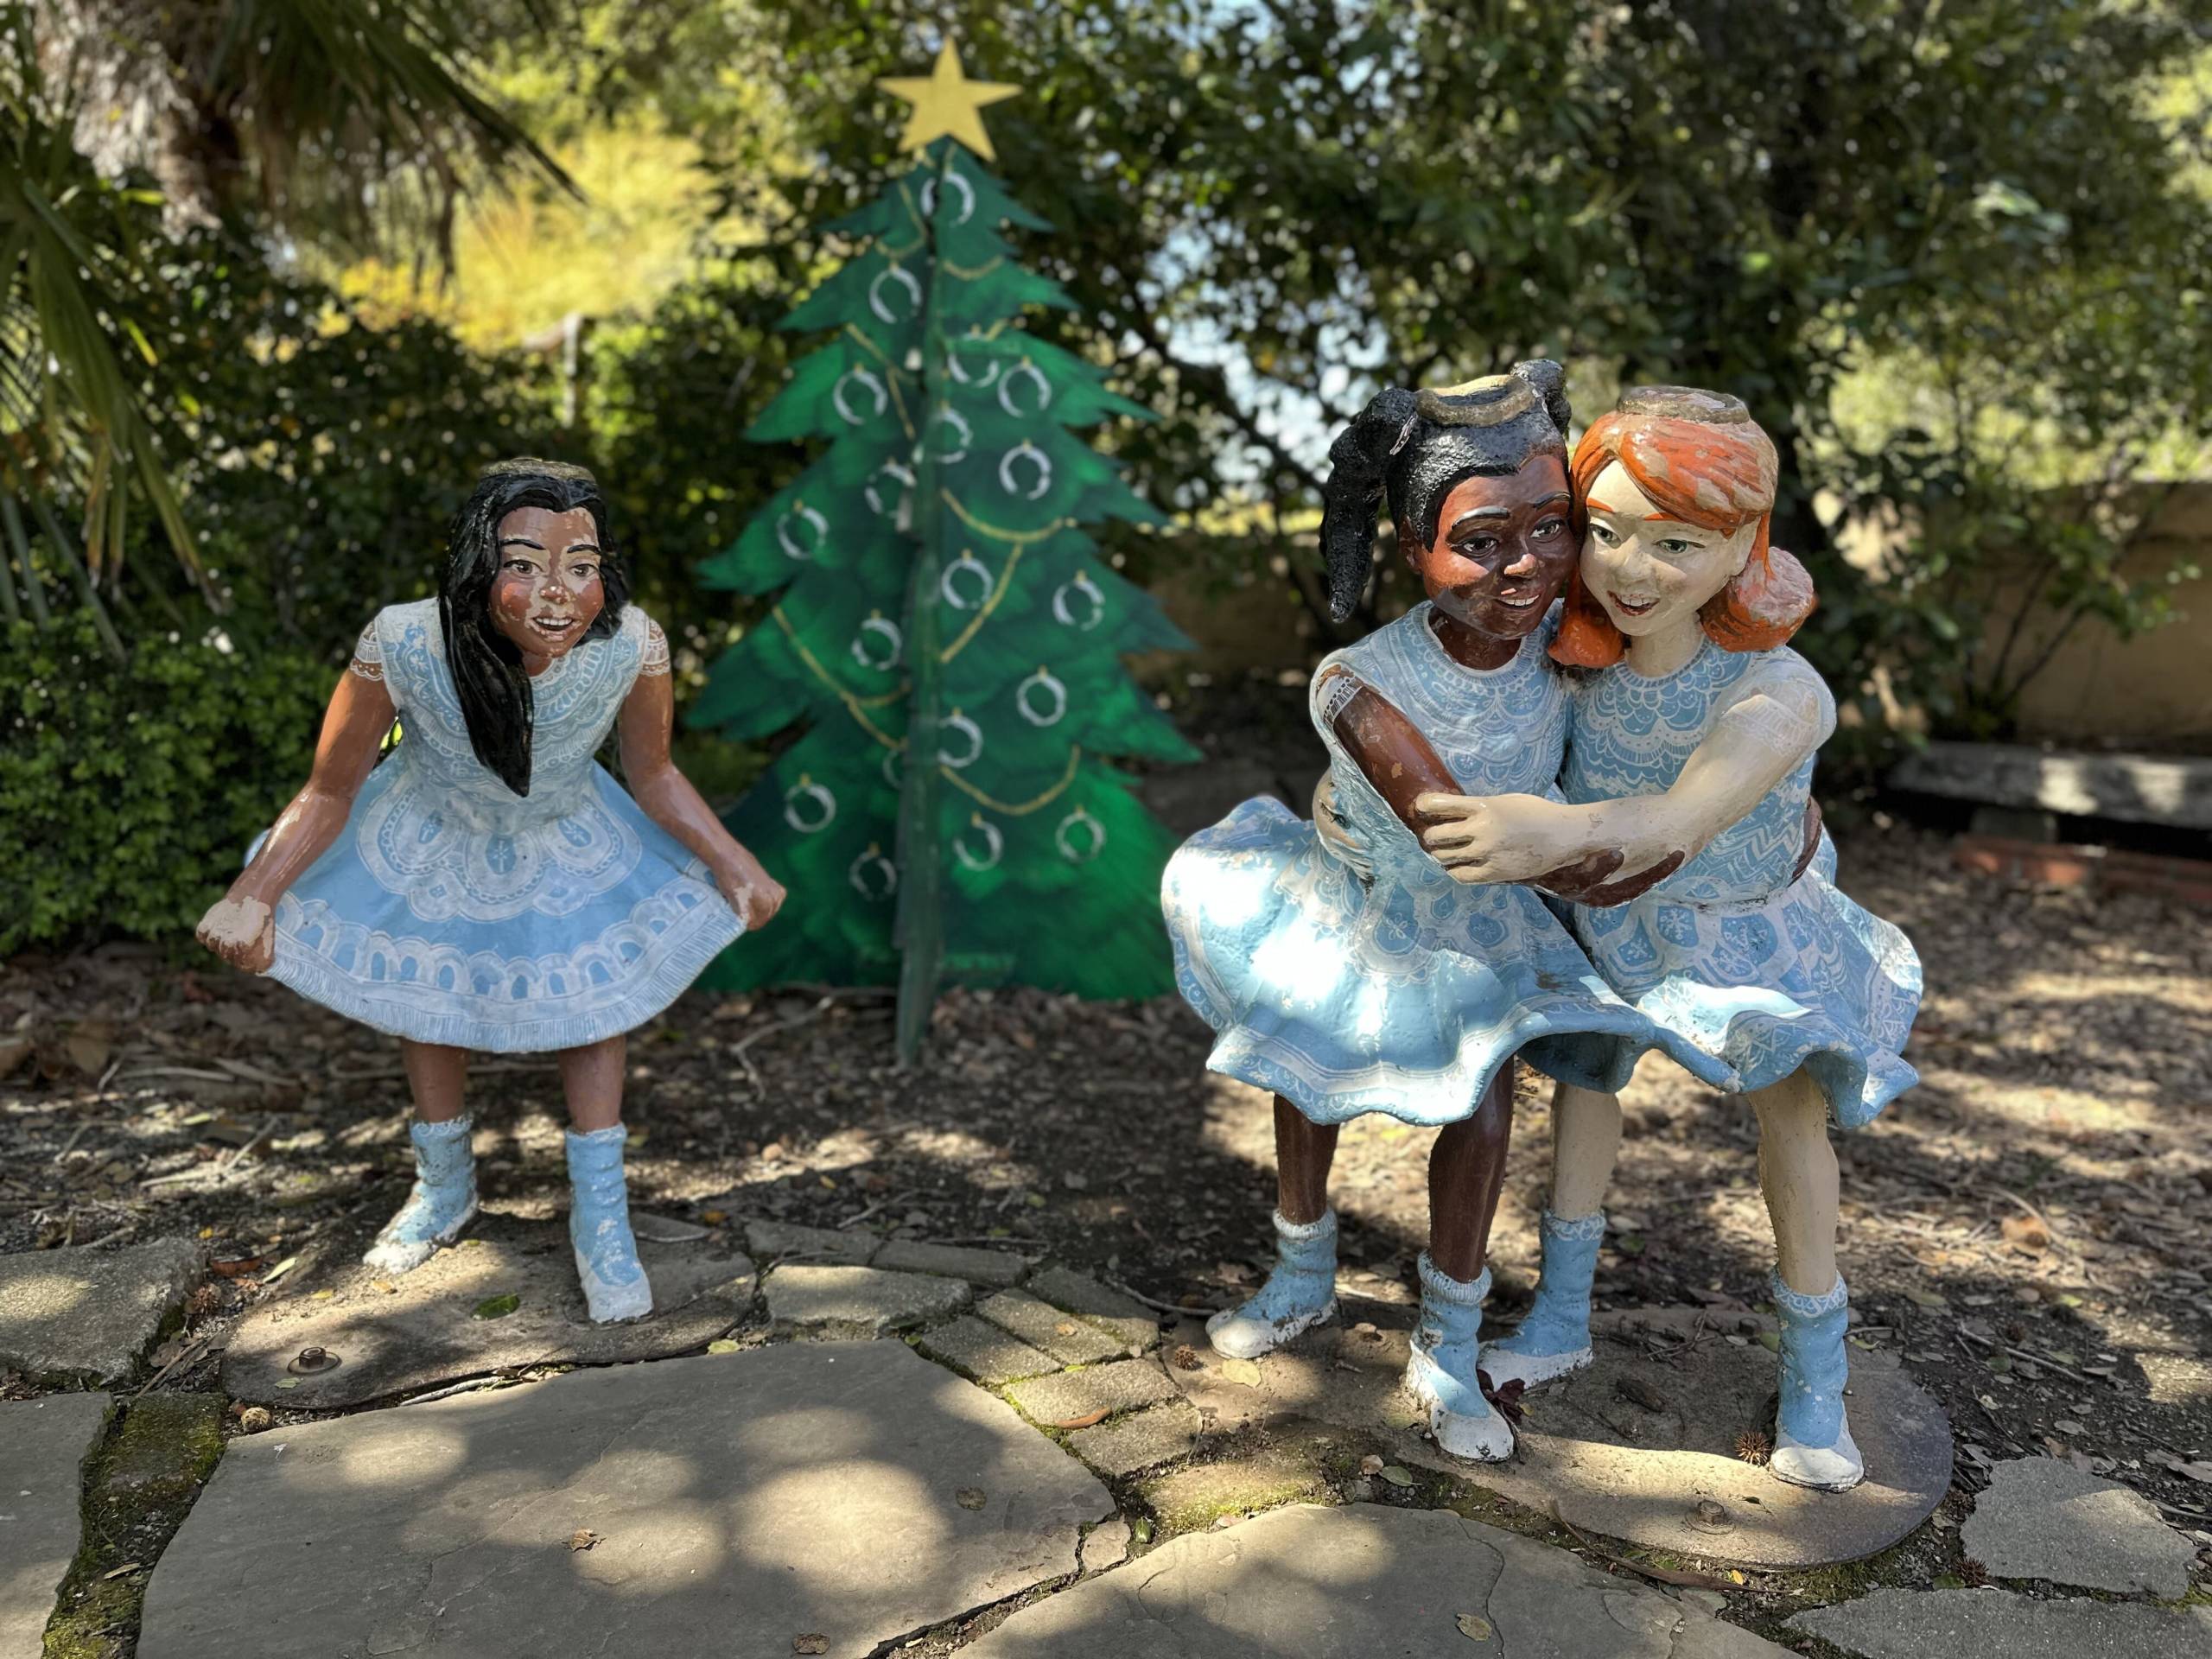 Three seemingly life-size statues of smiling little girls in white-and-blue pinafores. The girl on the far left appears Asian and has long black hair. The two girls to the right embrace happily; the girl on the left appears Black, with Black hair, and the third girl appears white, with red hair. They all stand in dappled sunlight beneath trees.